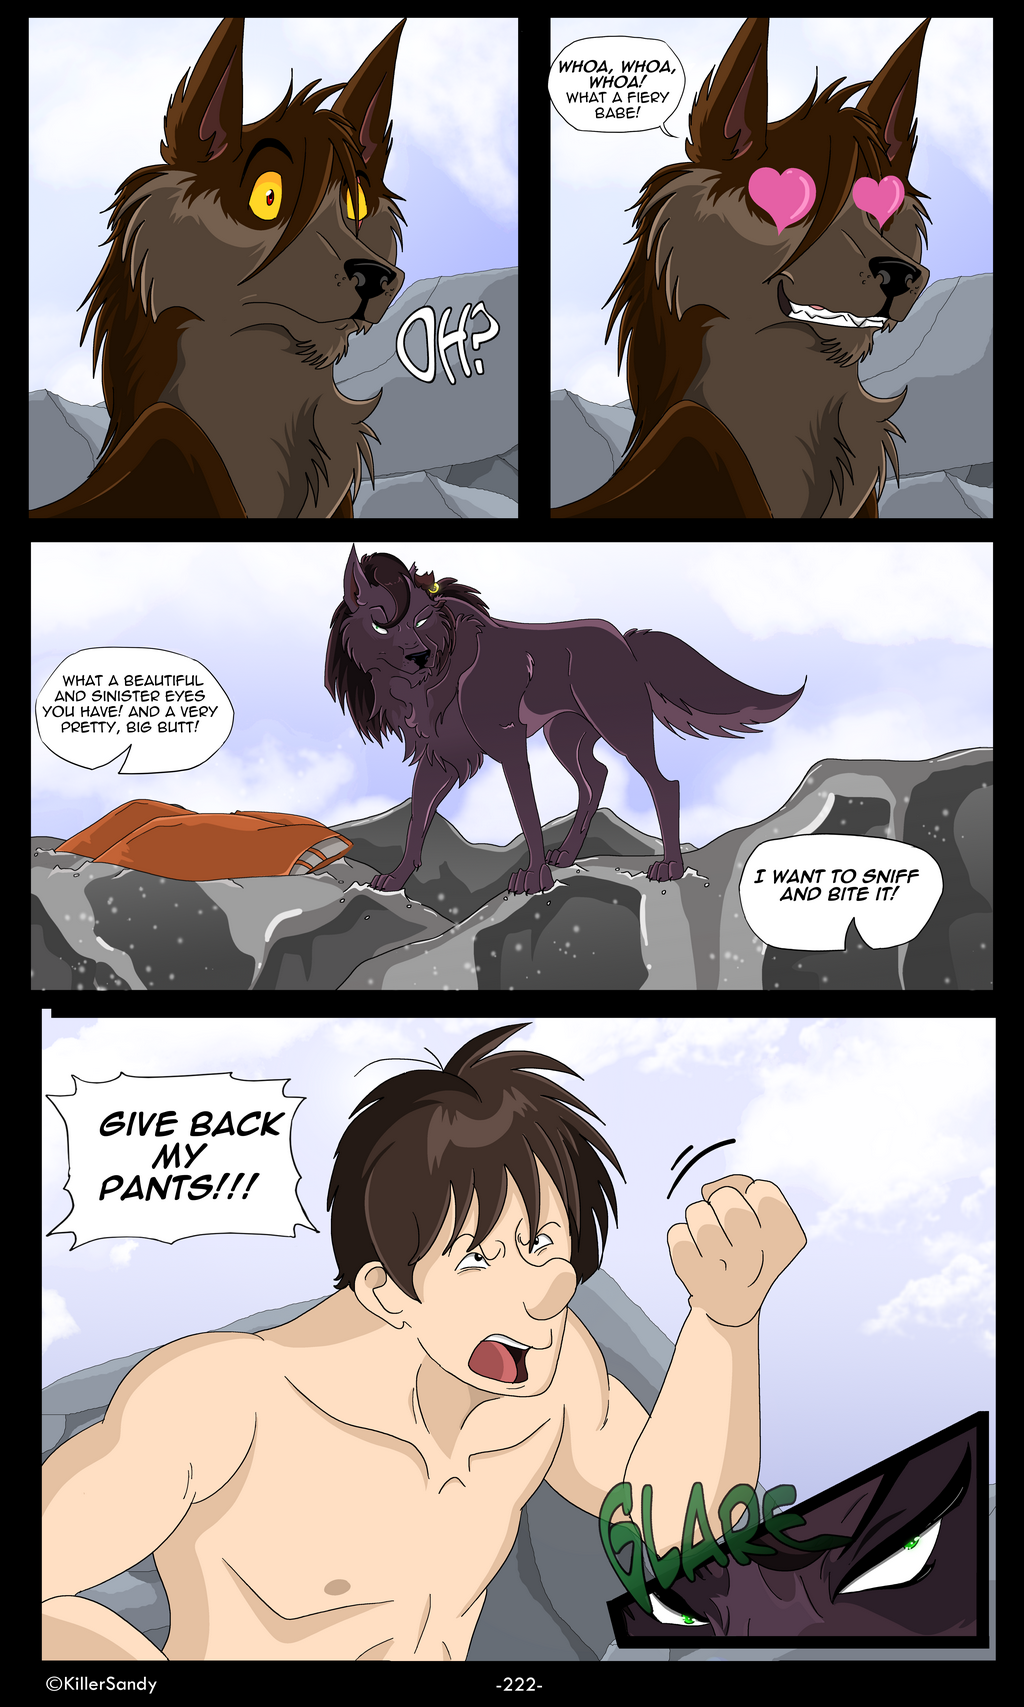 The Prince of the Moonlight Stone page 222